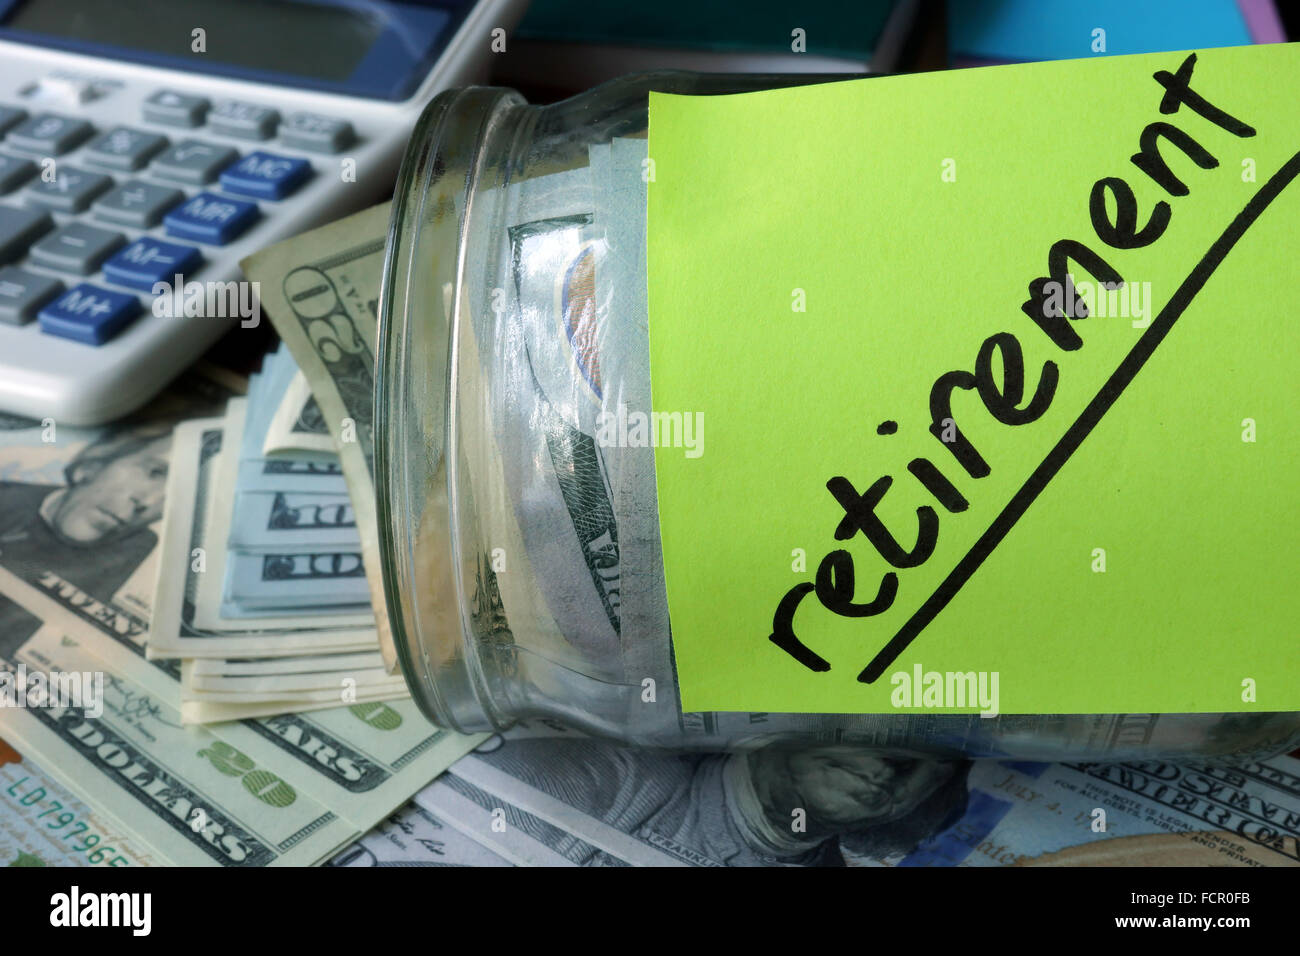 Jar with label Retirement Plan and money on the table. Saving money concept. Stock Photo